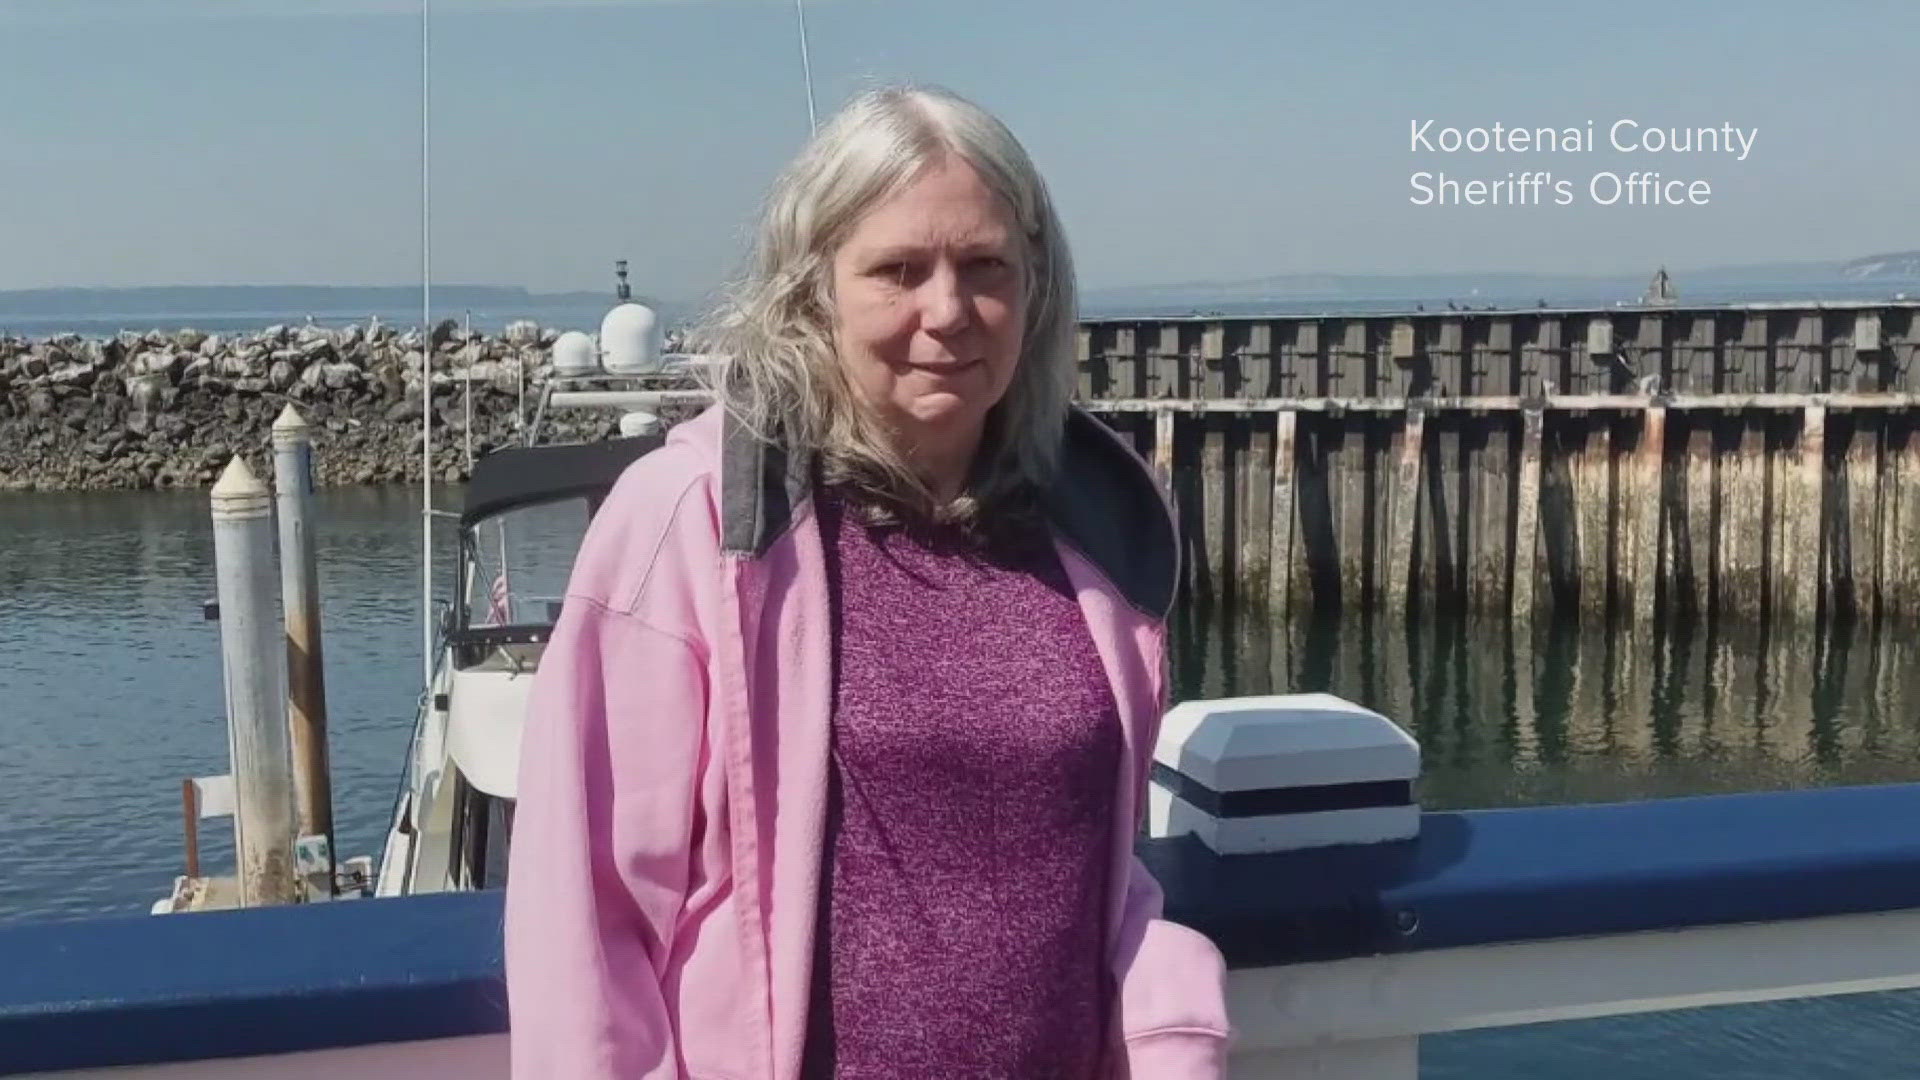 Search and rescue crews called off the search for 62-year-old Linda Kent Tuesday. However her family is still asking questions as they continue looking for her.